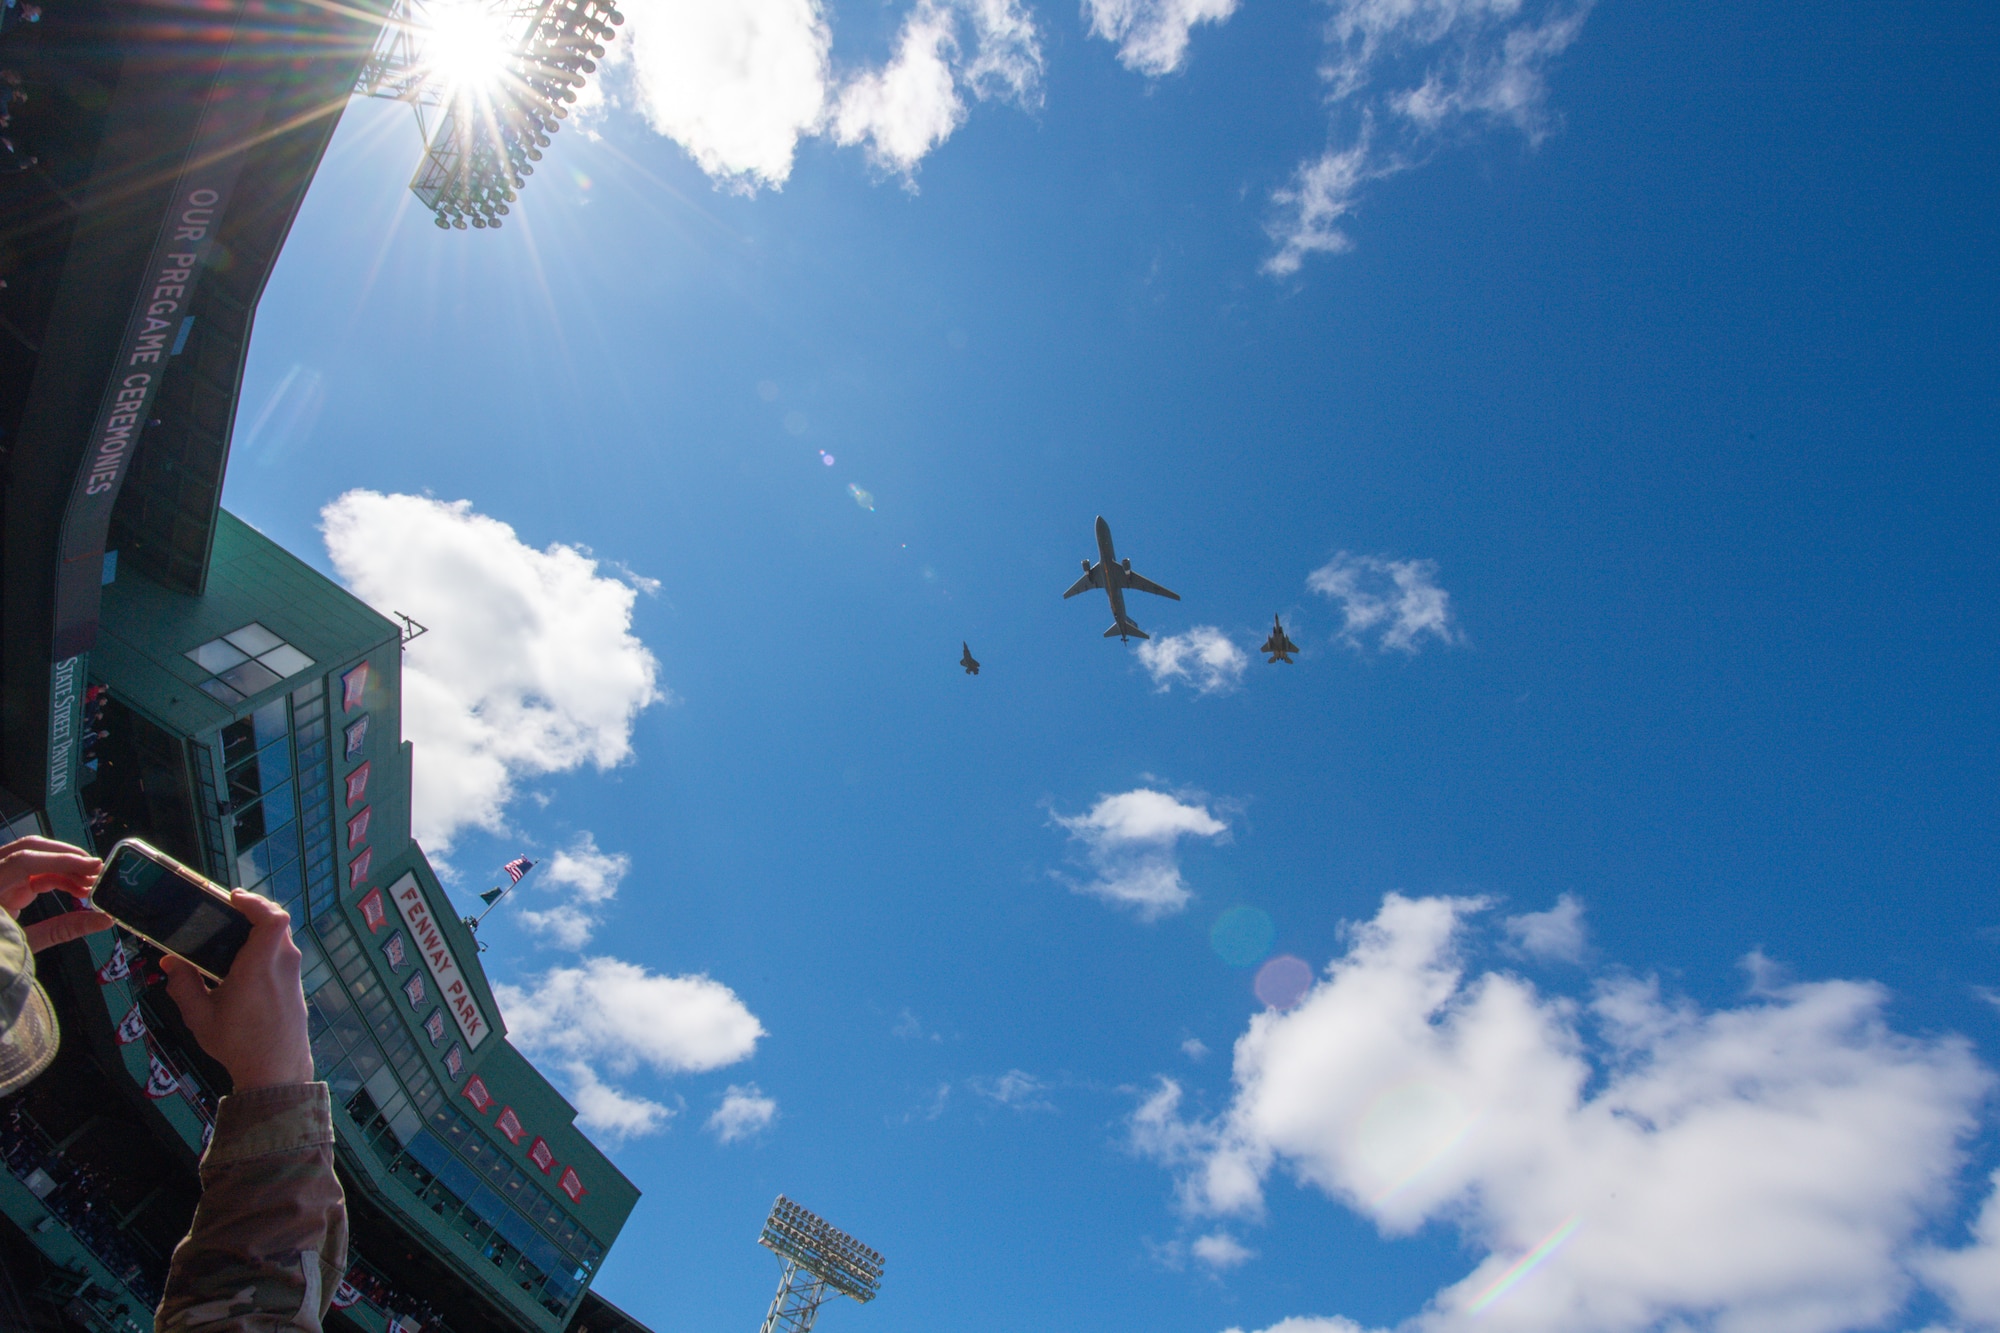 An F-35A Lightning II assigned to the Vermont Air National Guard joins a KC-46 Pegasus assigned to Pease Air National Guard and an F-15 Eagle assigned to Barnes Air National Guard for a flyover tribute during the Boston Red Sox 2021 season home opener at Fenway Park.